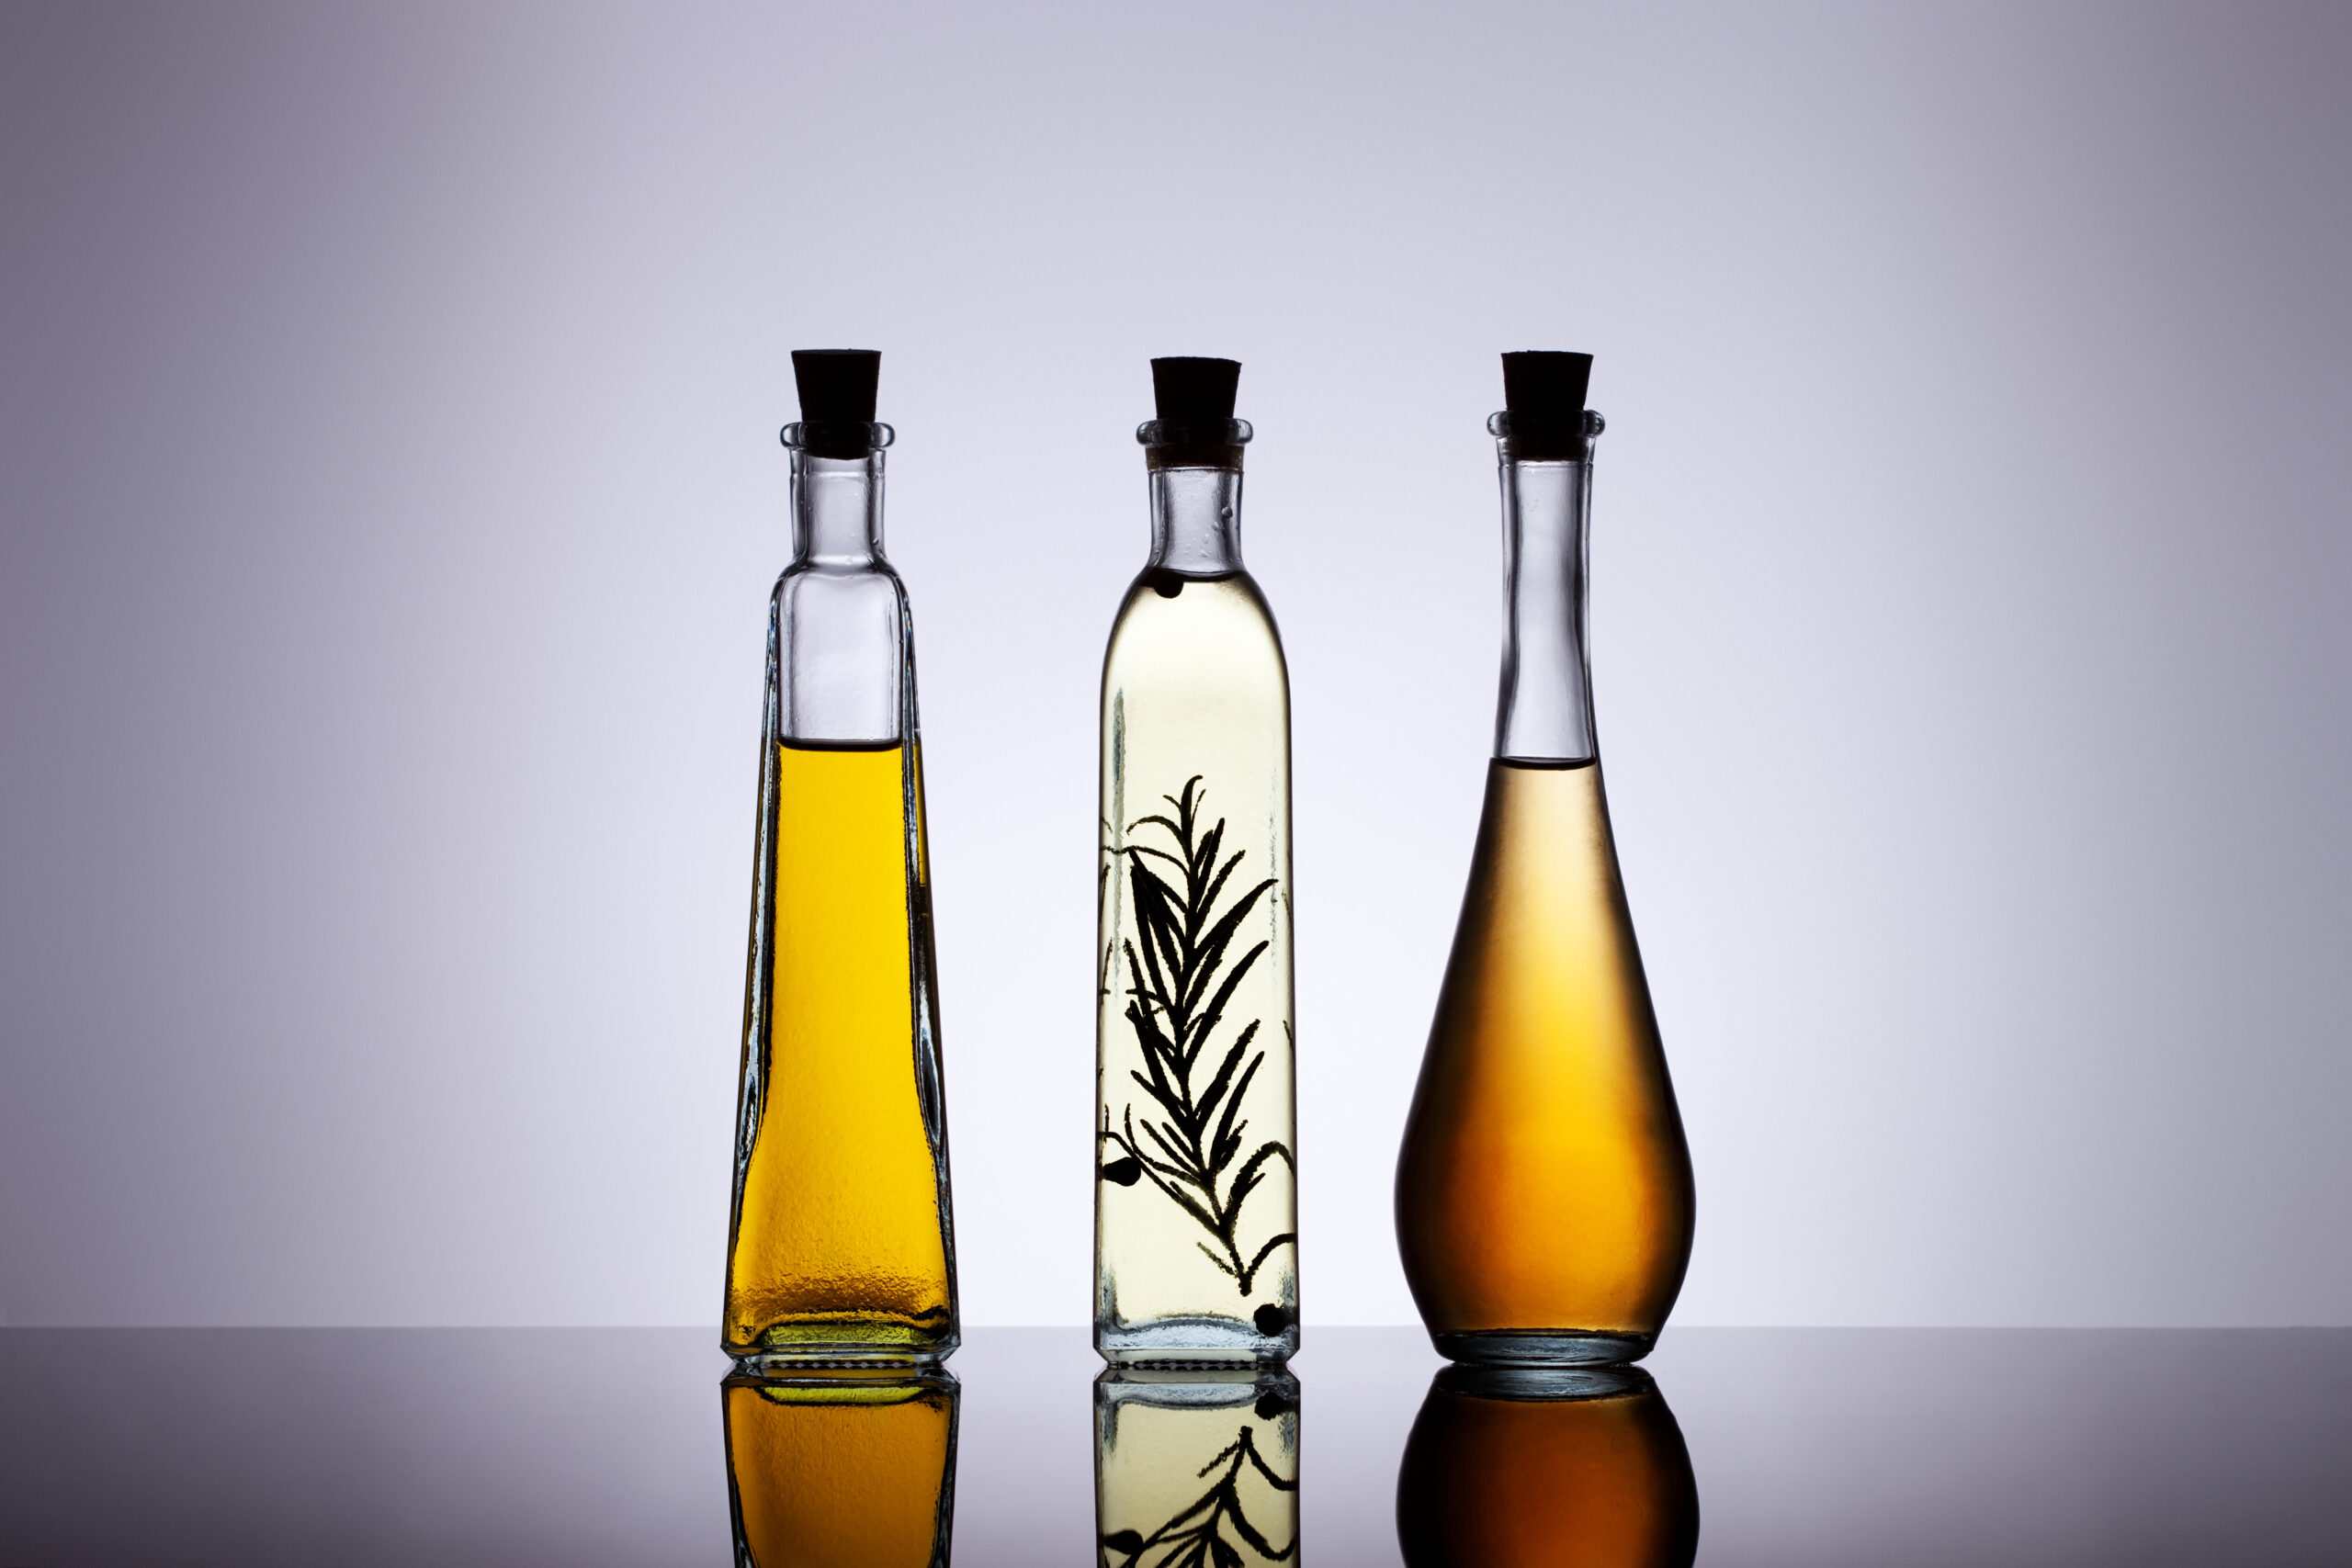 These oils are more effective than olive oil against pathogens in food